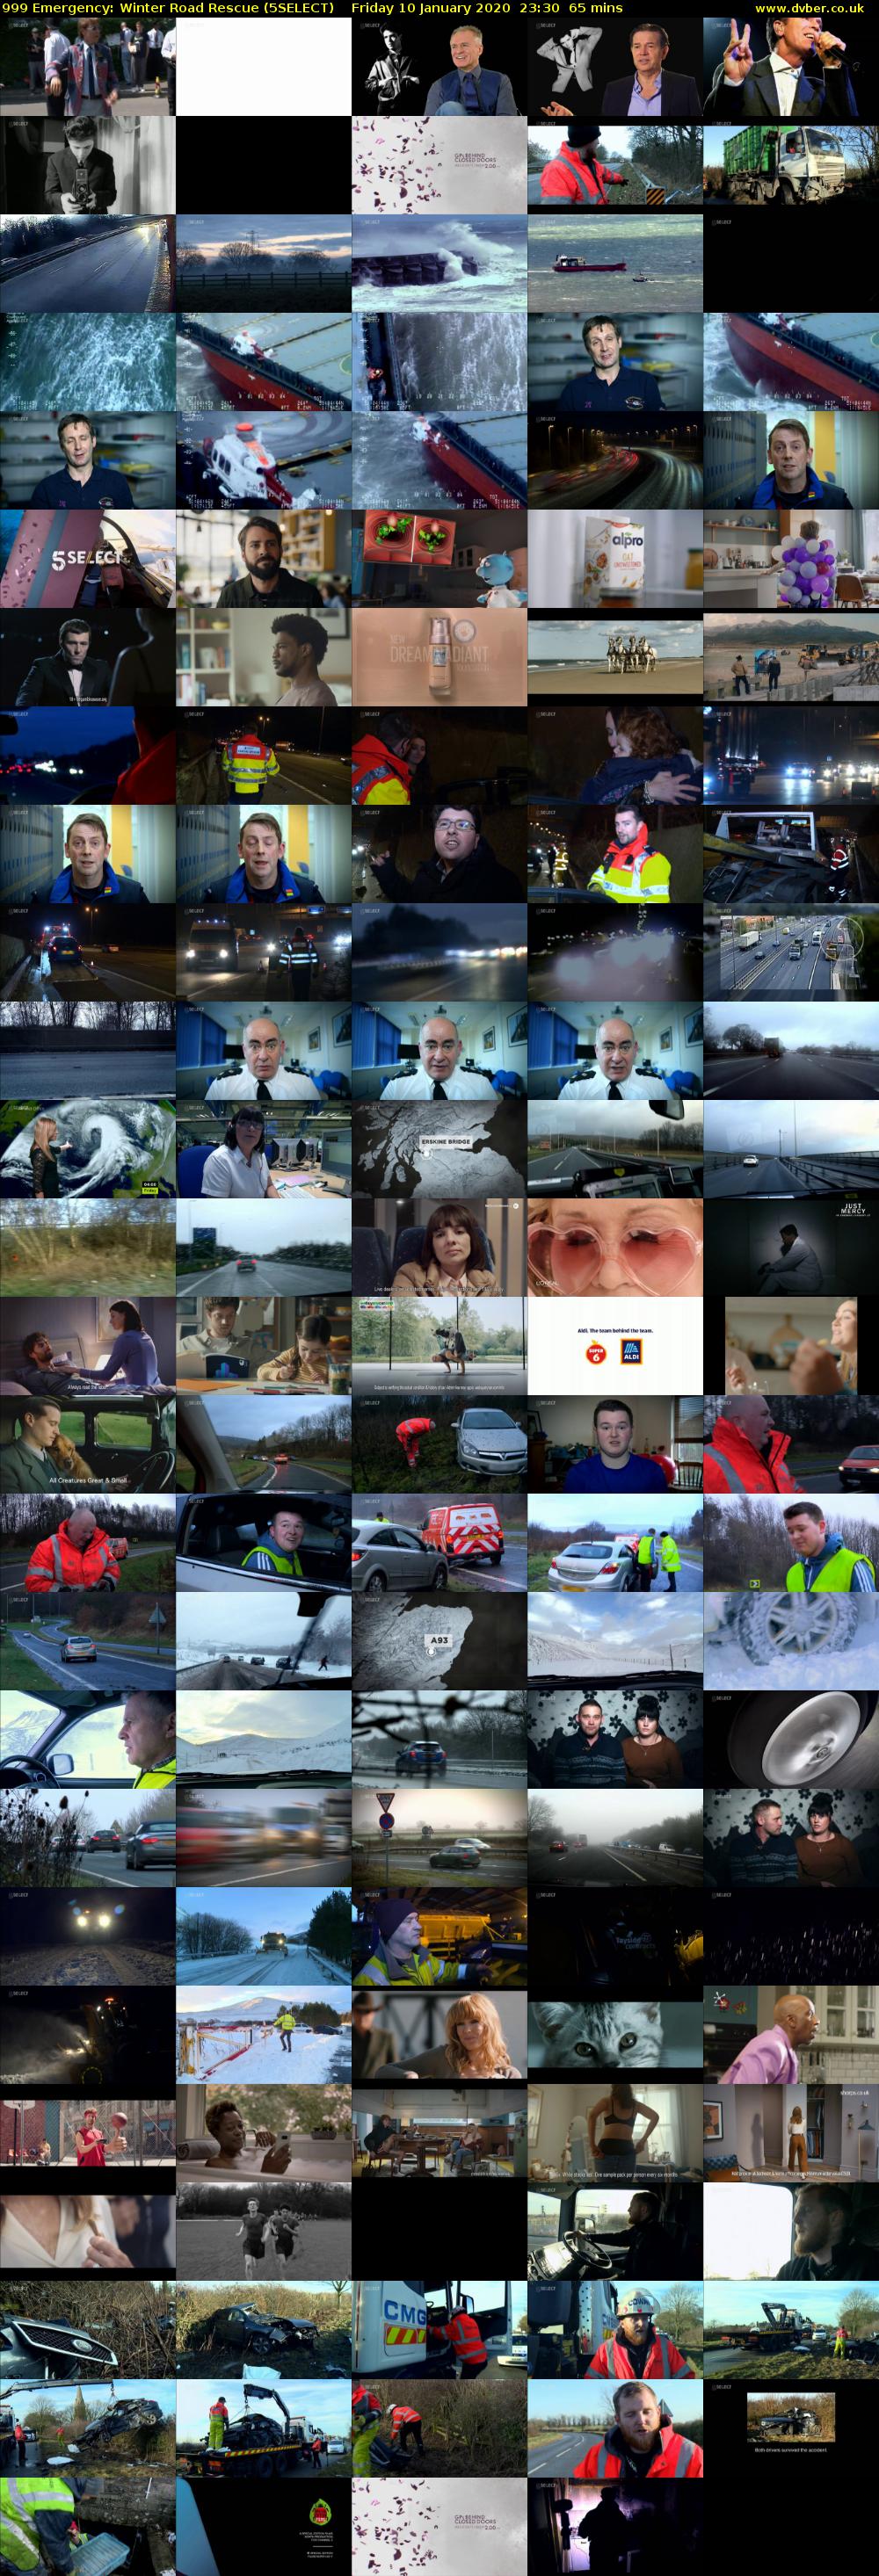 999 Emergency: Winter Road Rescue (5SELECT) Friday 10 January 2020 23:30 - 00:35